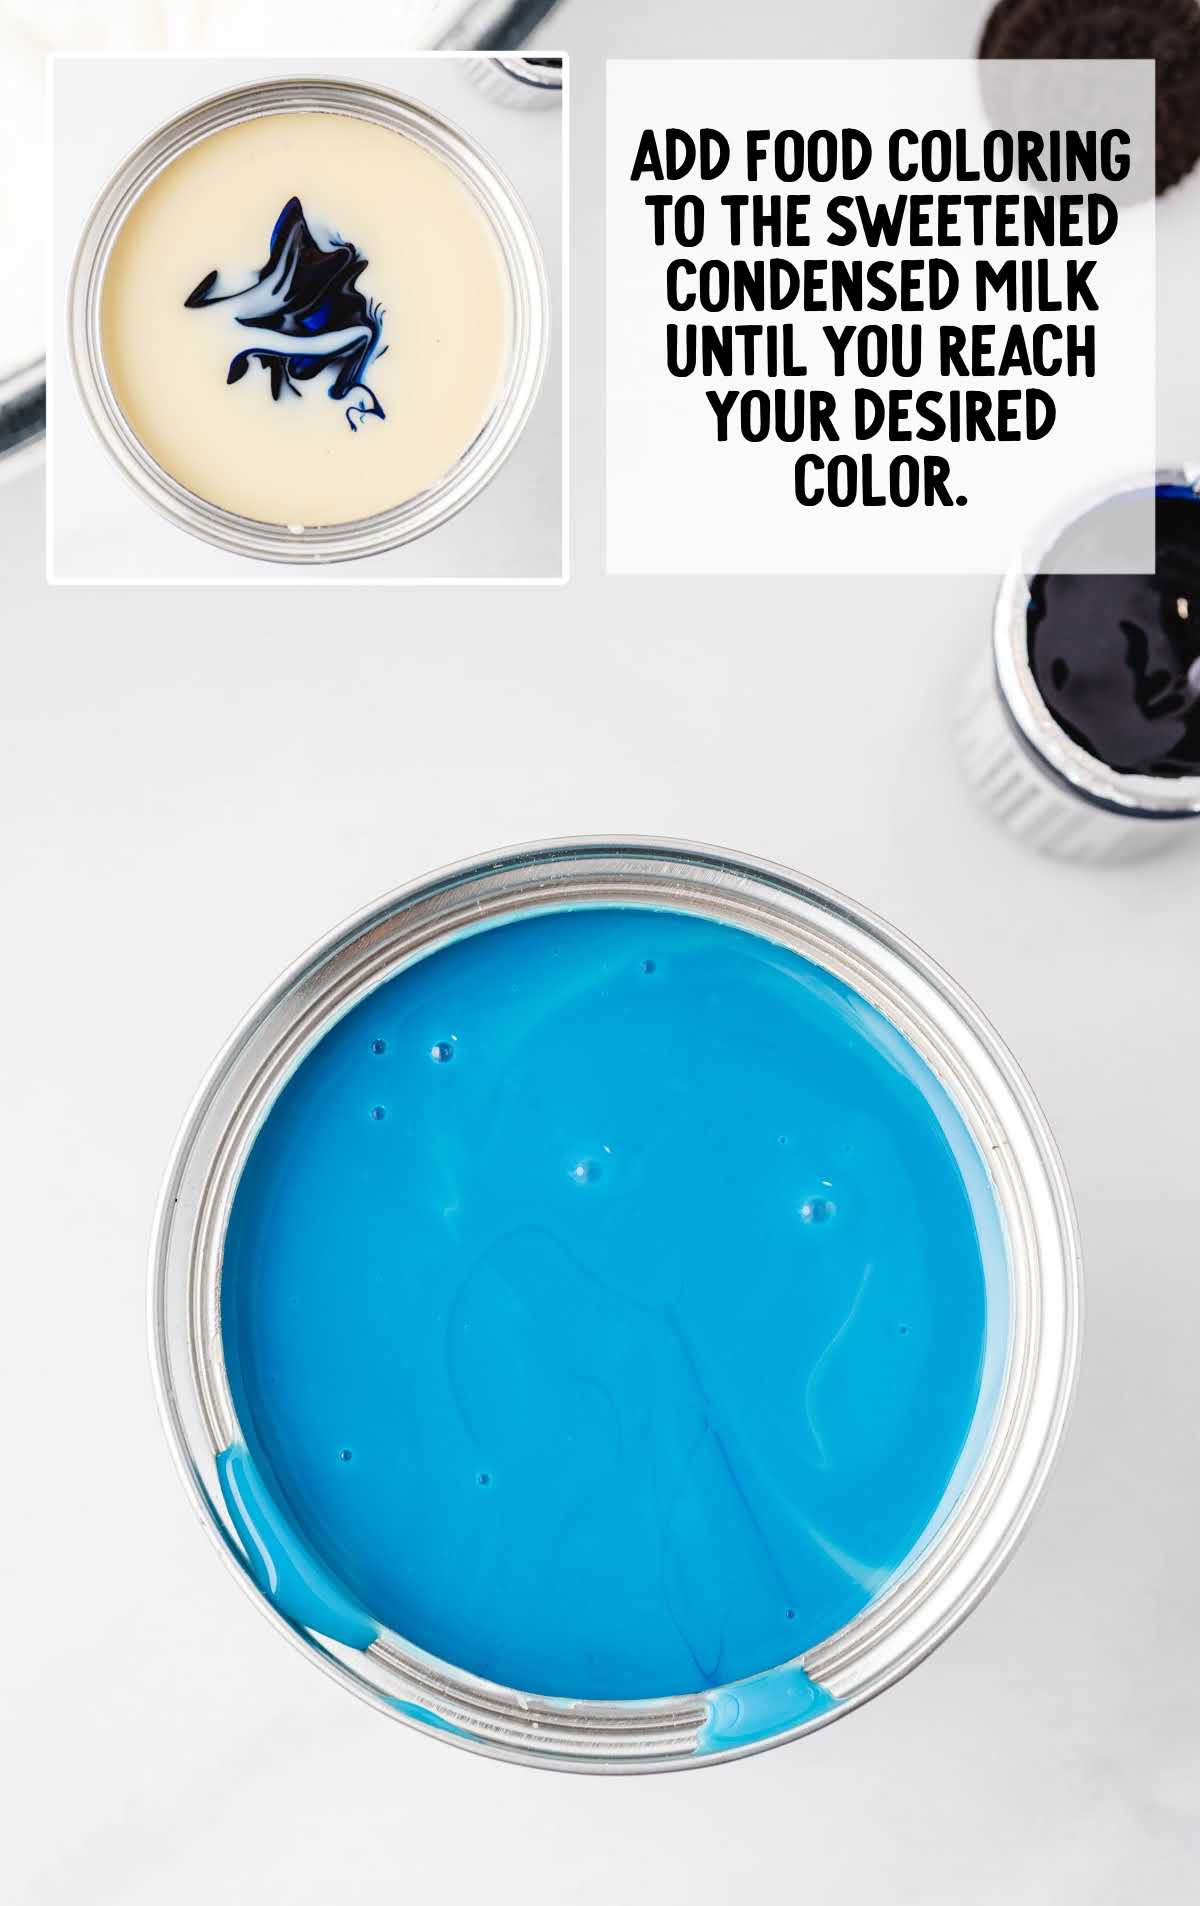 food coloring being added to sweetened condensed milk